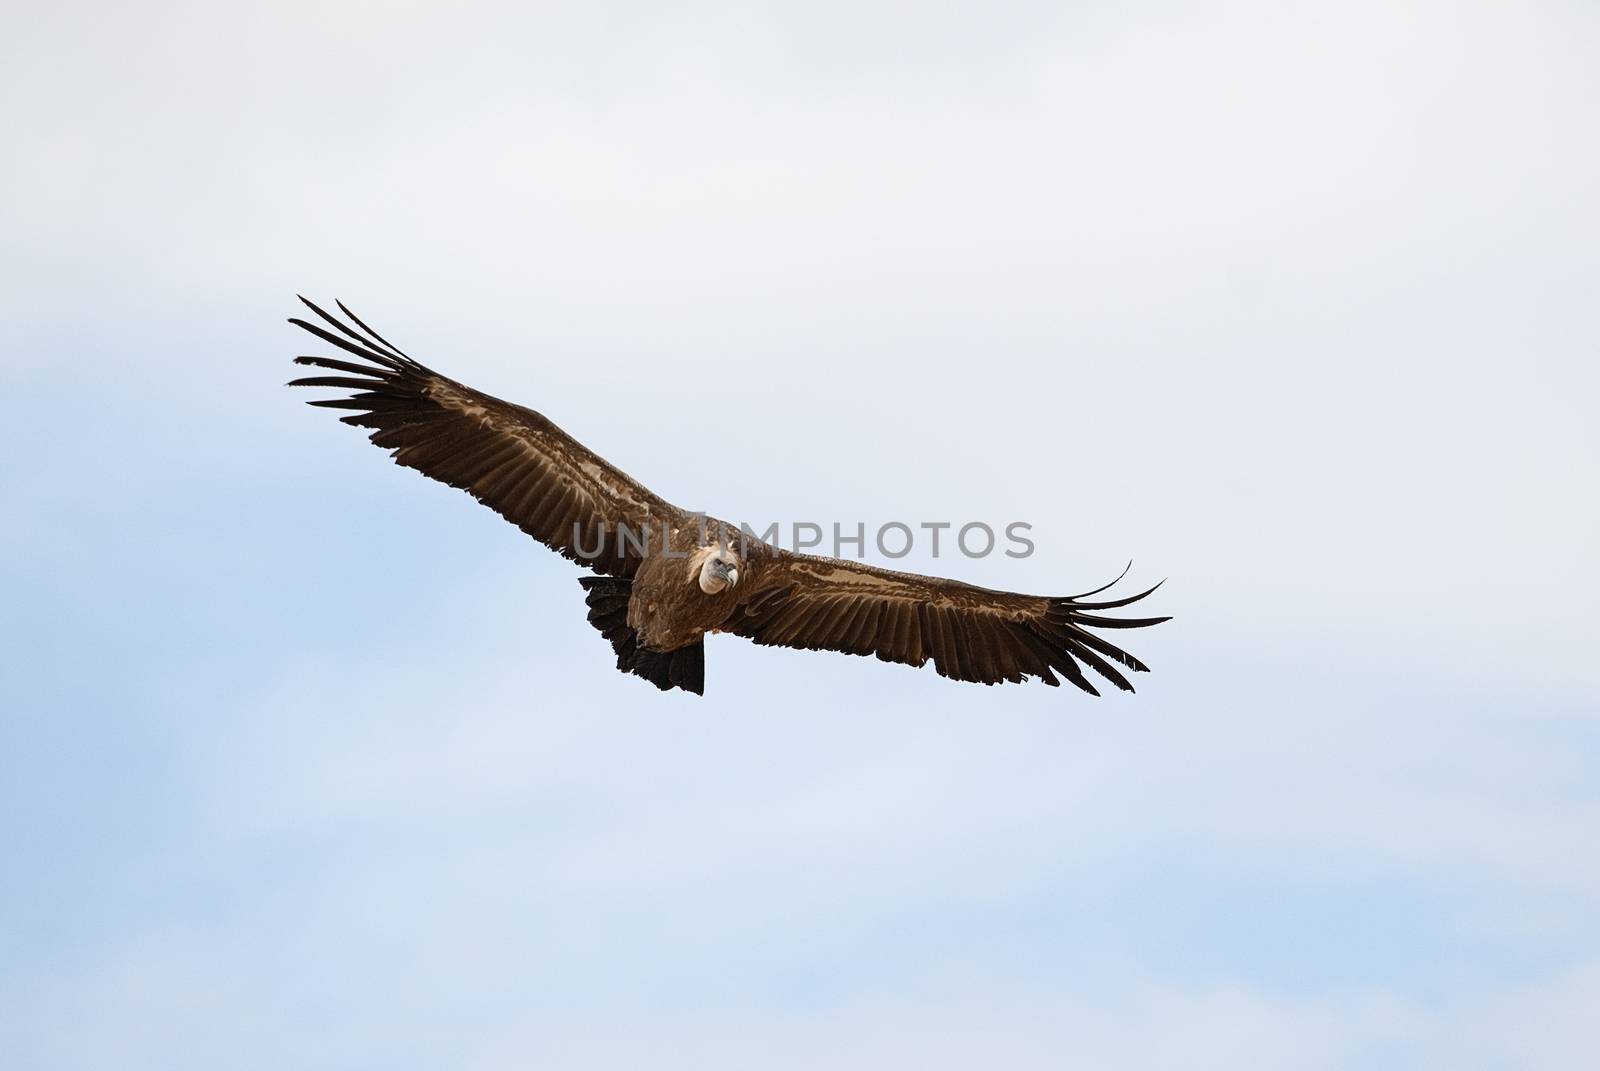 Griffon Vulture (Gyps fulvus) flying in central, clouds and blue by jalonsohu@gmail.com